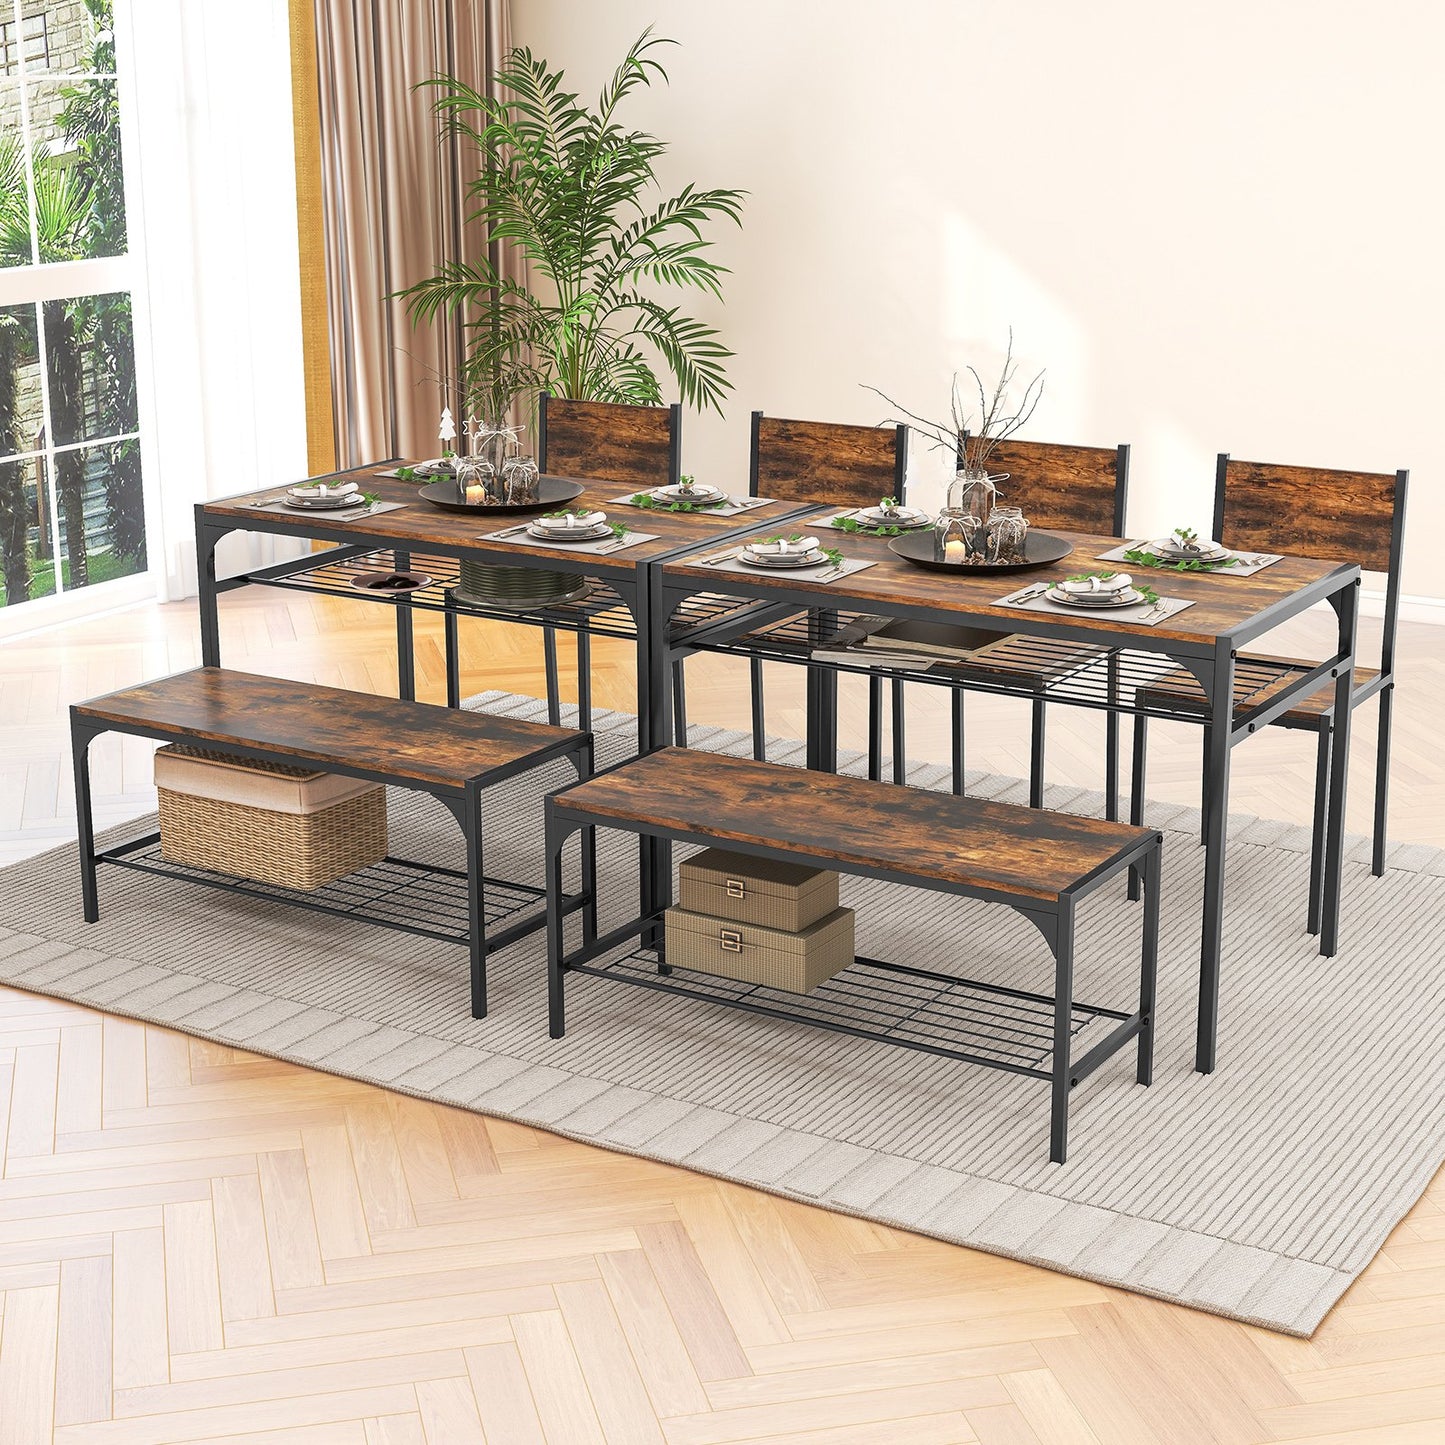 Industrial Style Rectangular Kitchen Table with Bench and Chairs, Rustic Brown